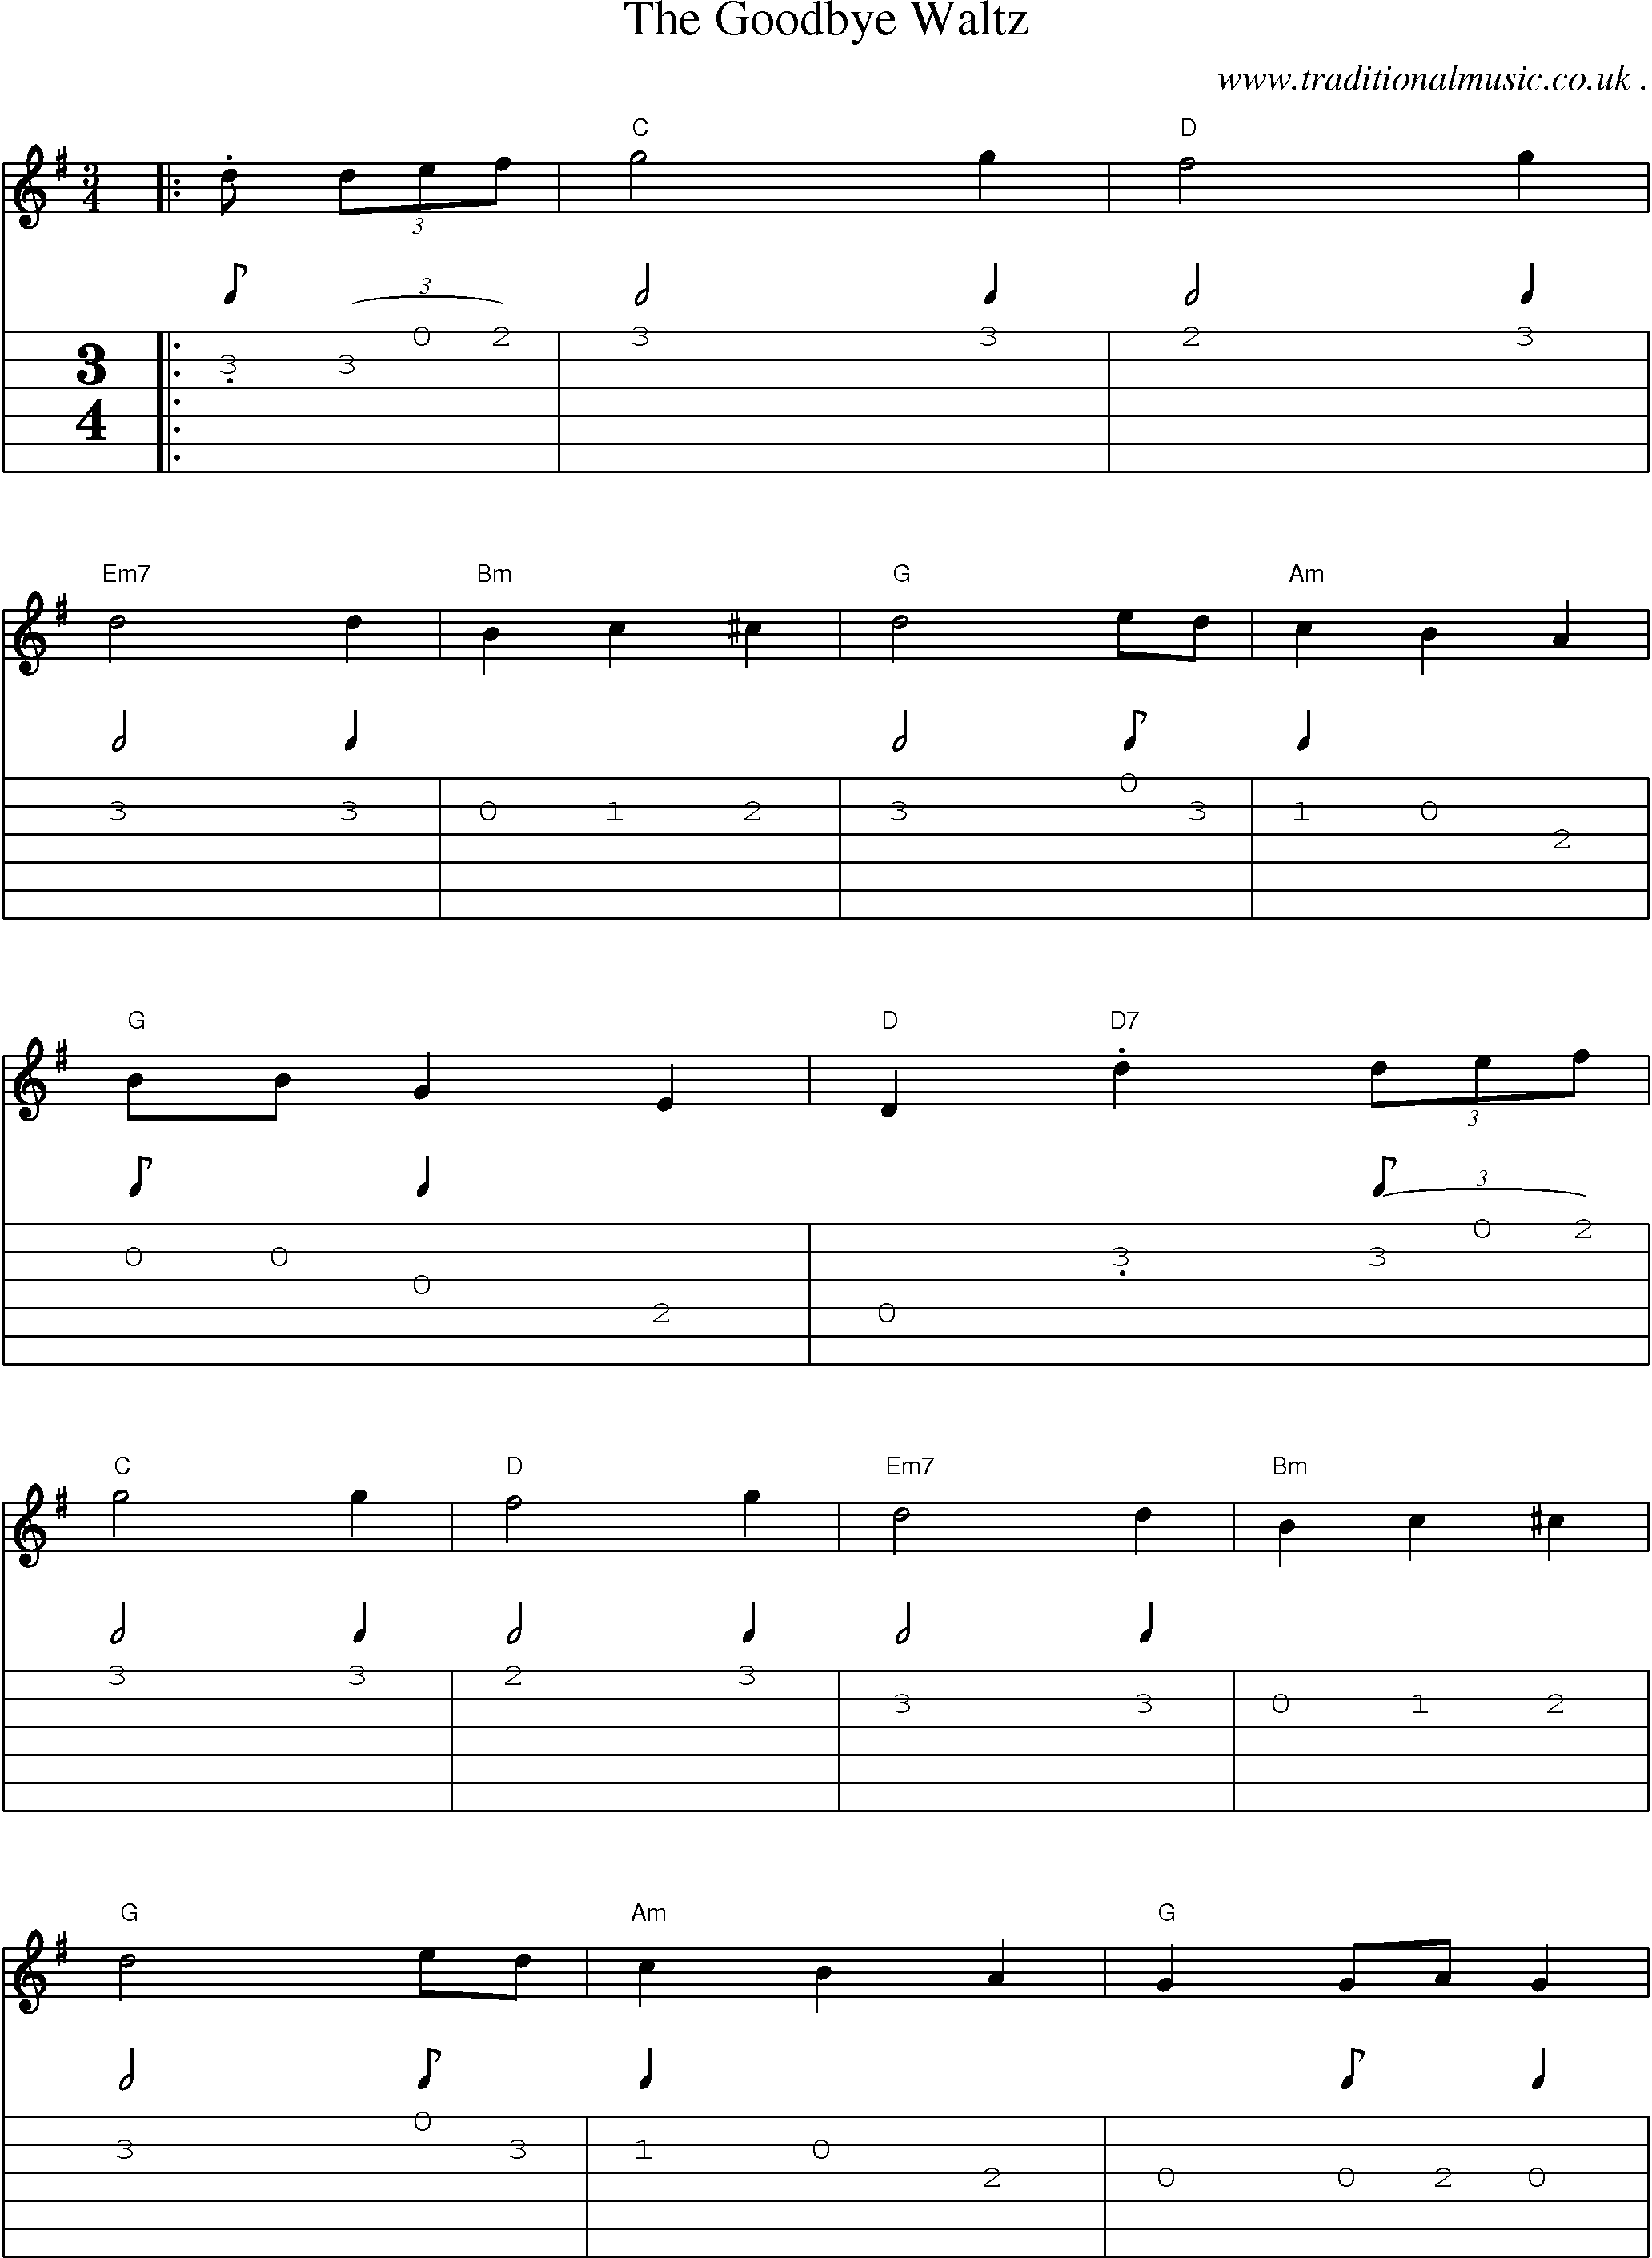 Sheet-Music and Guitar Tabs for The Goodbye Waltz